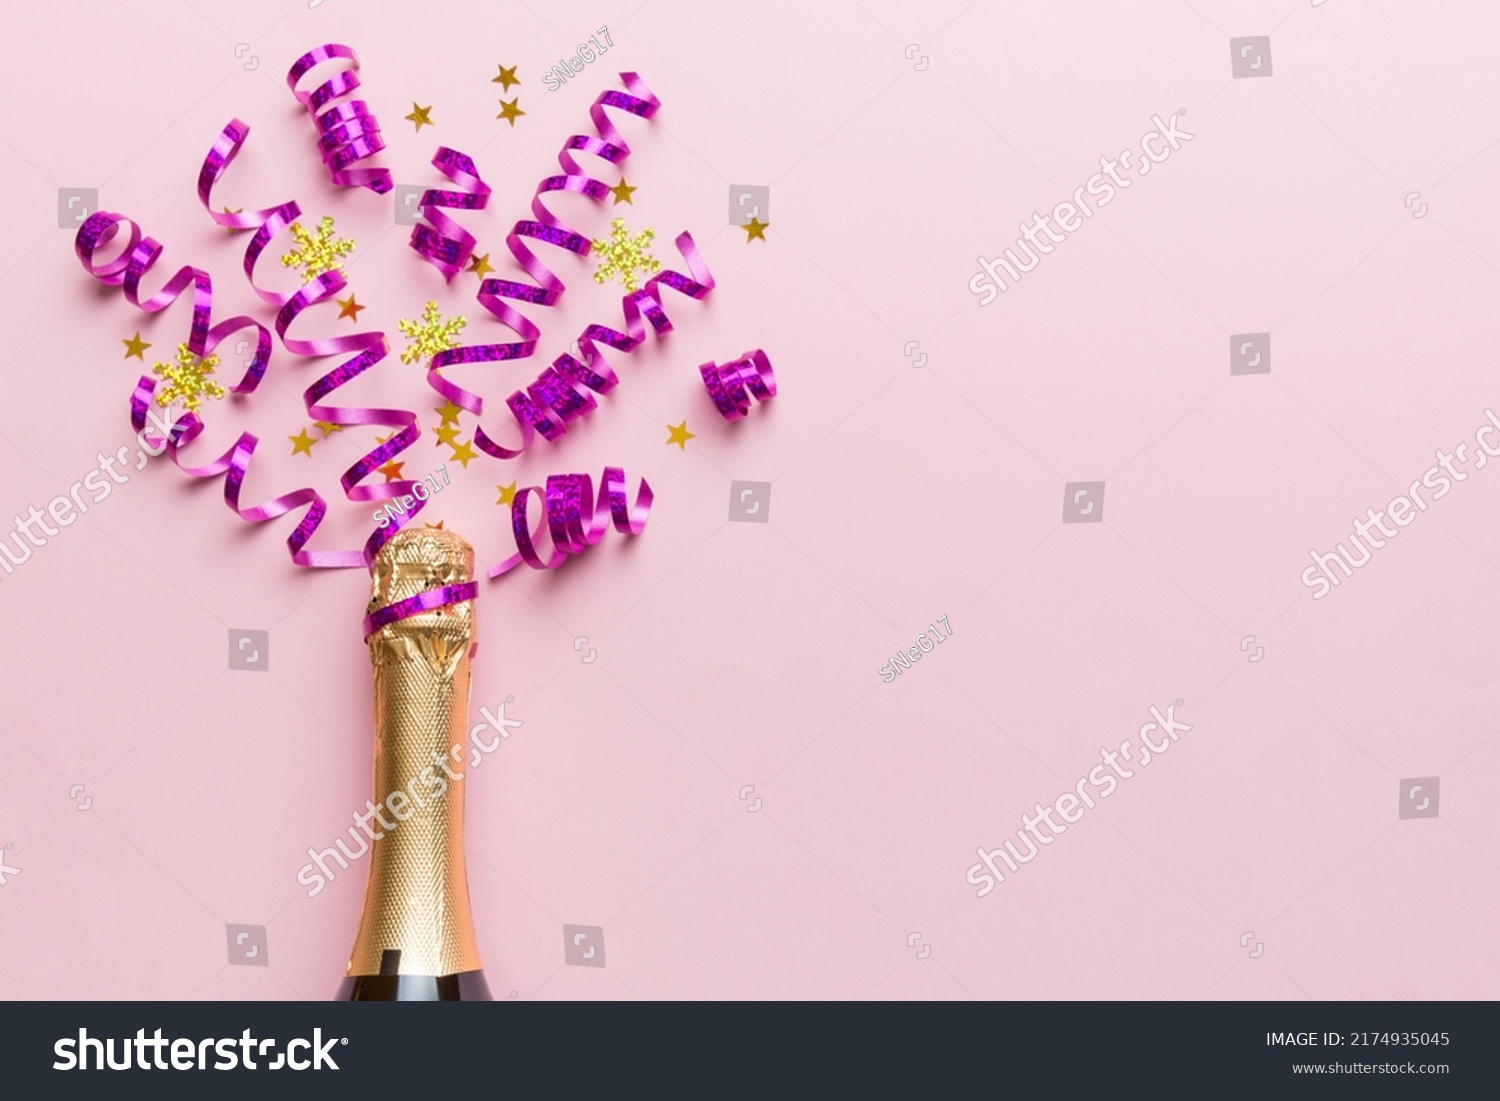 Creative flat lay composition with bottle of champagne and space for text on color background. Champagne bottle with colorful party streamers. holiday or christmas concept. #2174935045